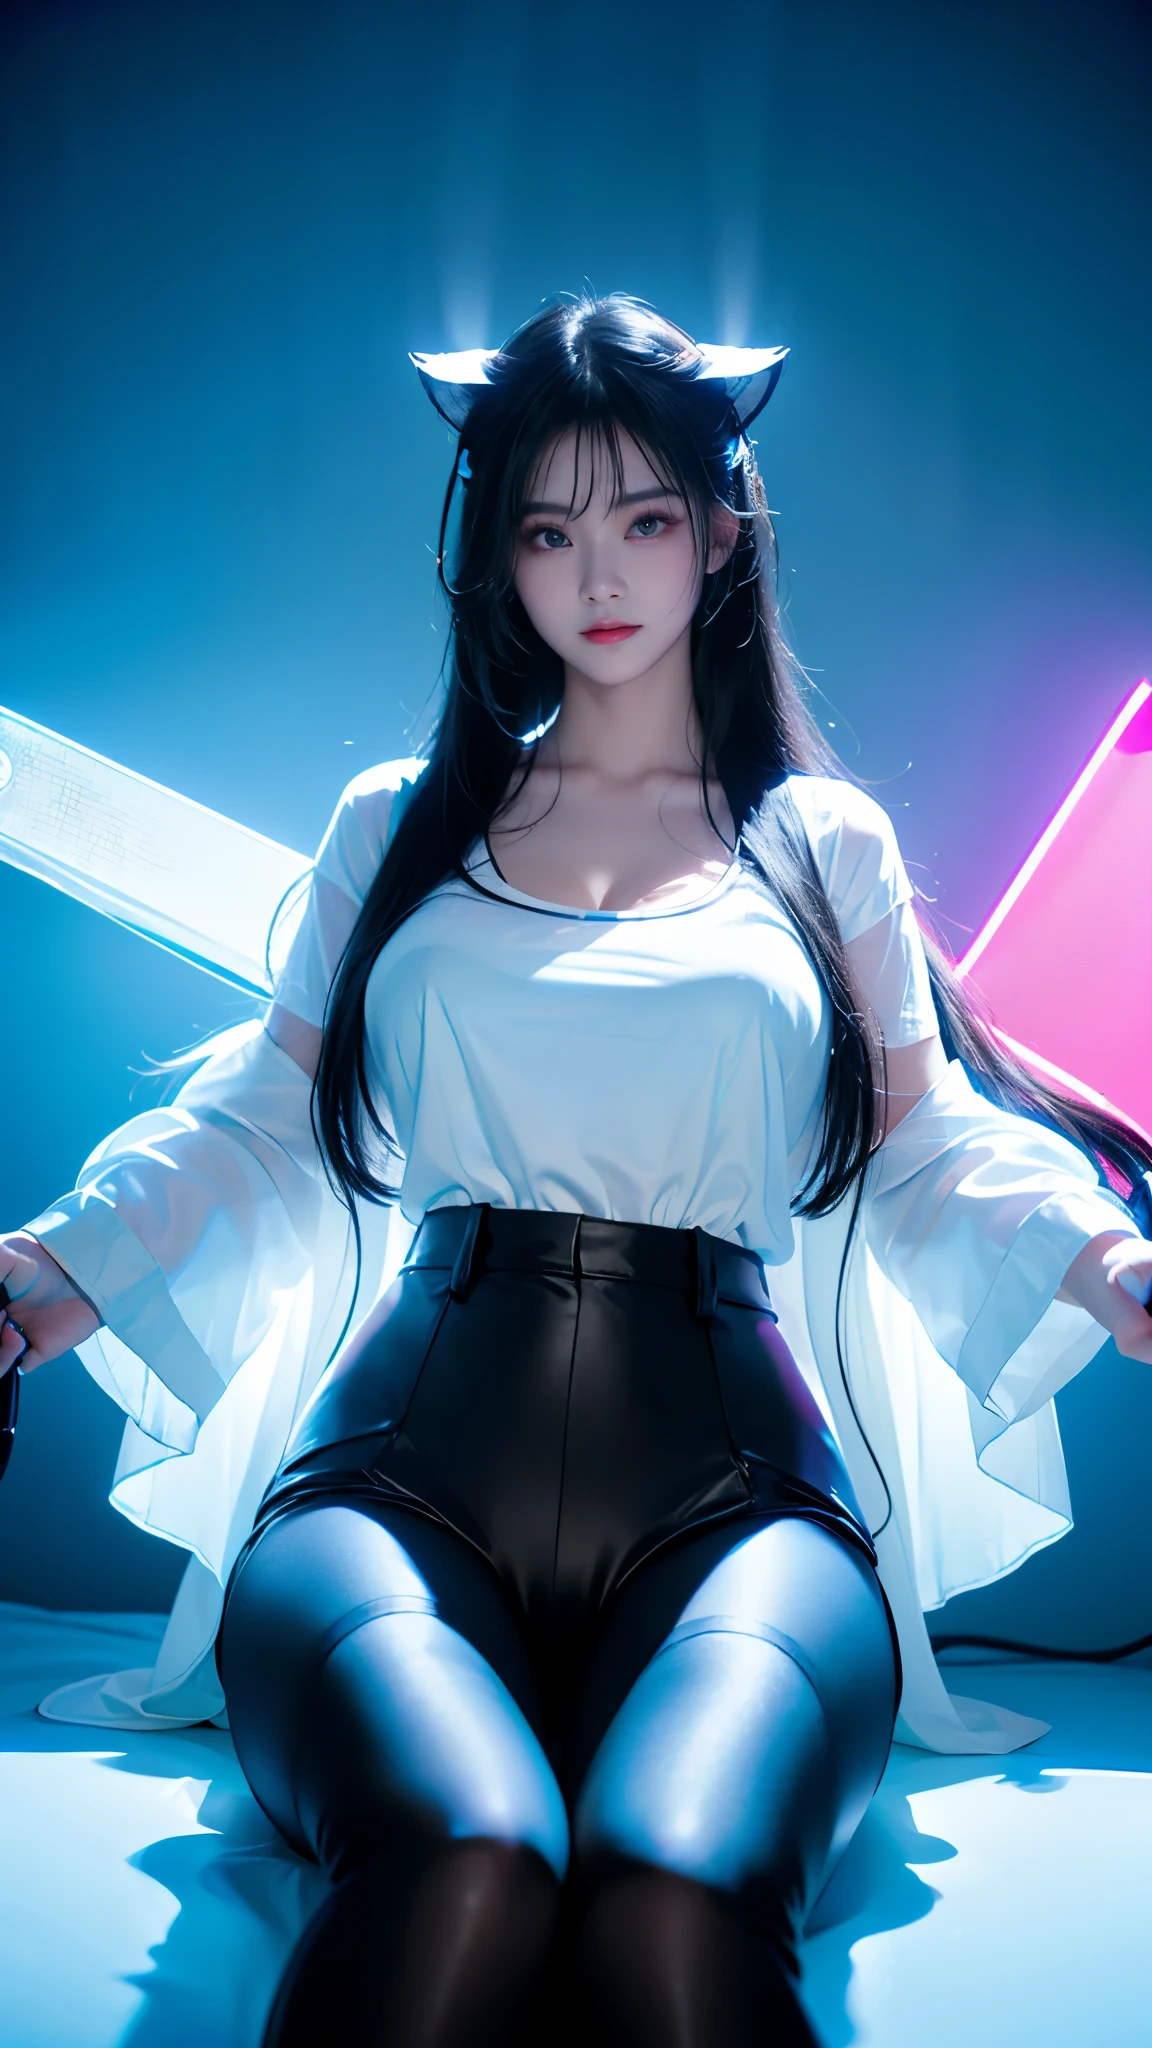 girl、Heaven、hotel、black long straight hair、glowing neon lights、Video game room、sitting on gaming chair、Girls playing games、Illuminated keyboard、Glowing cat ears、(((UV lamps、White shirt glowing under black light)))、plump big breasts、large cleavage、satin fabric hot pants